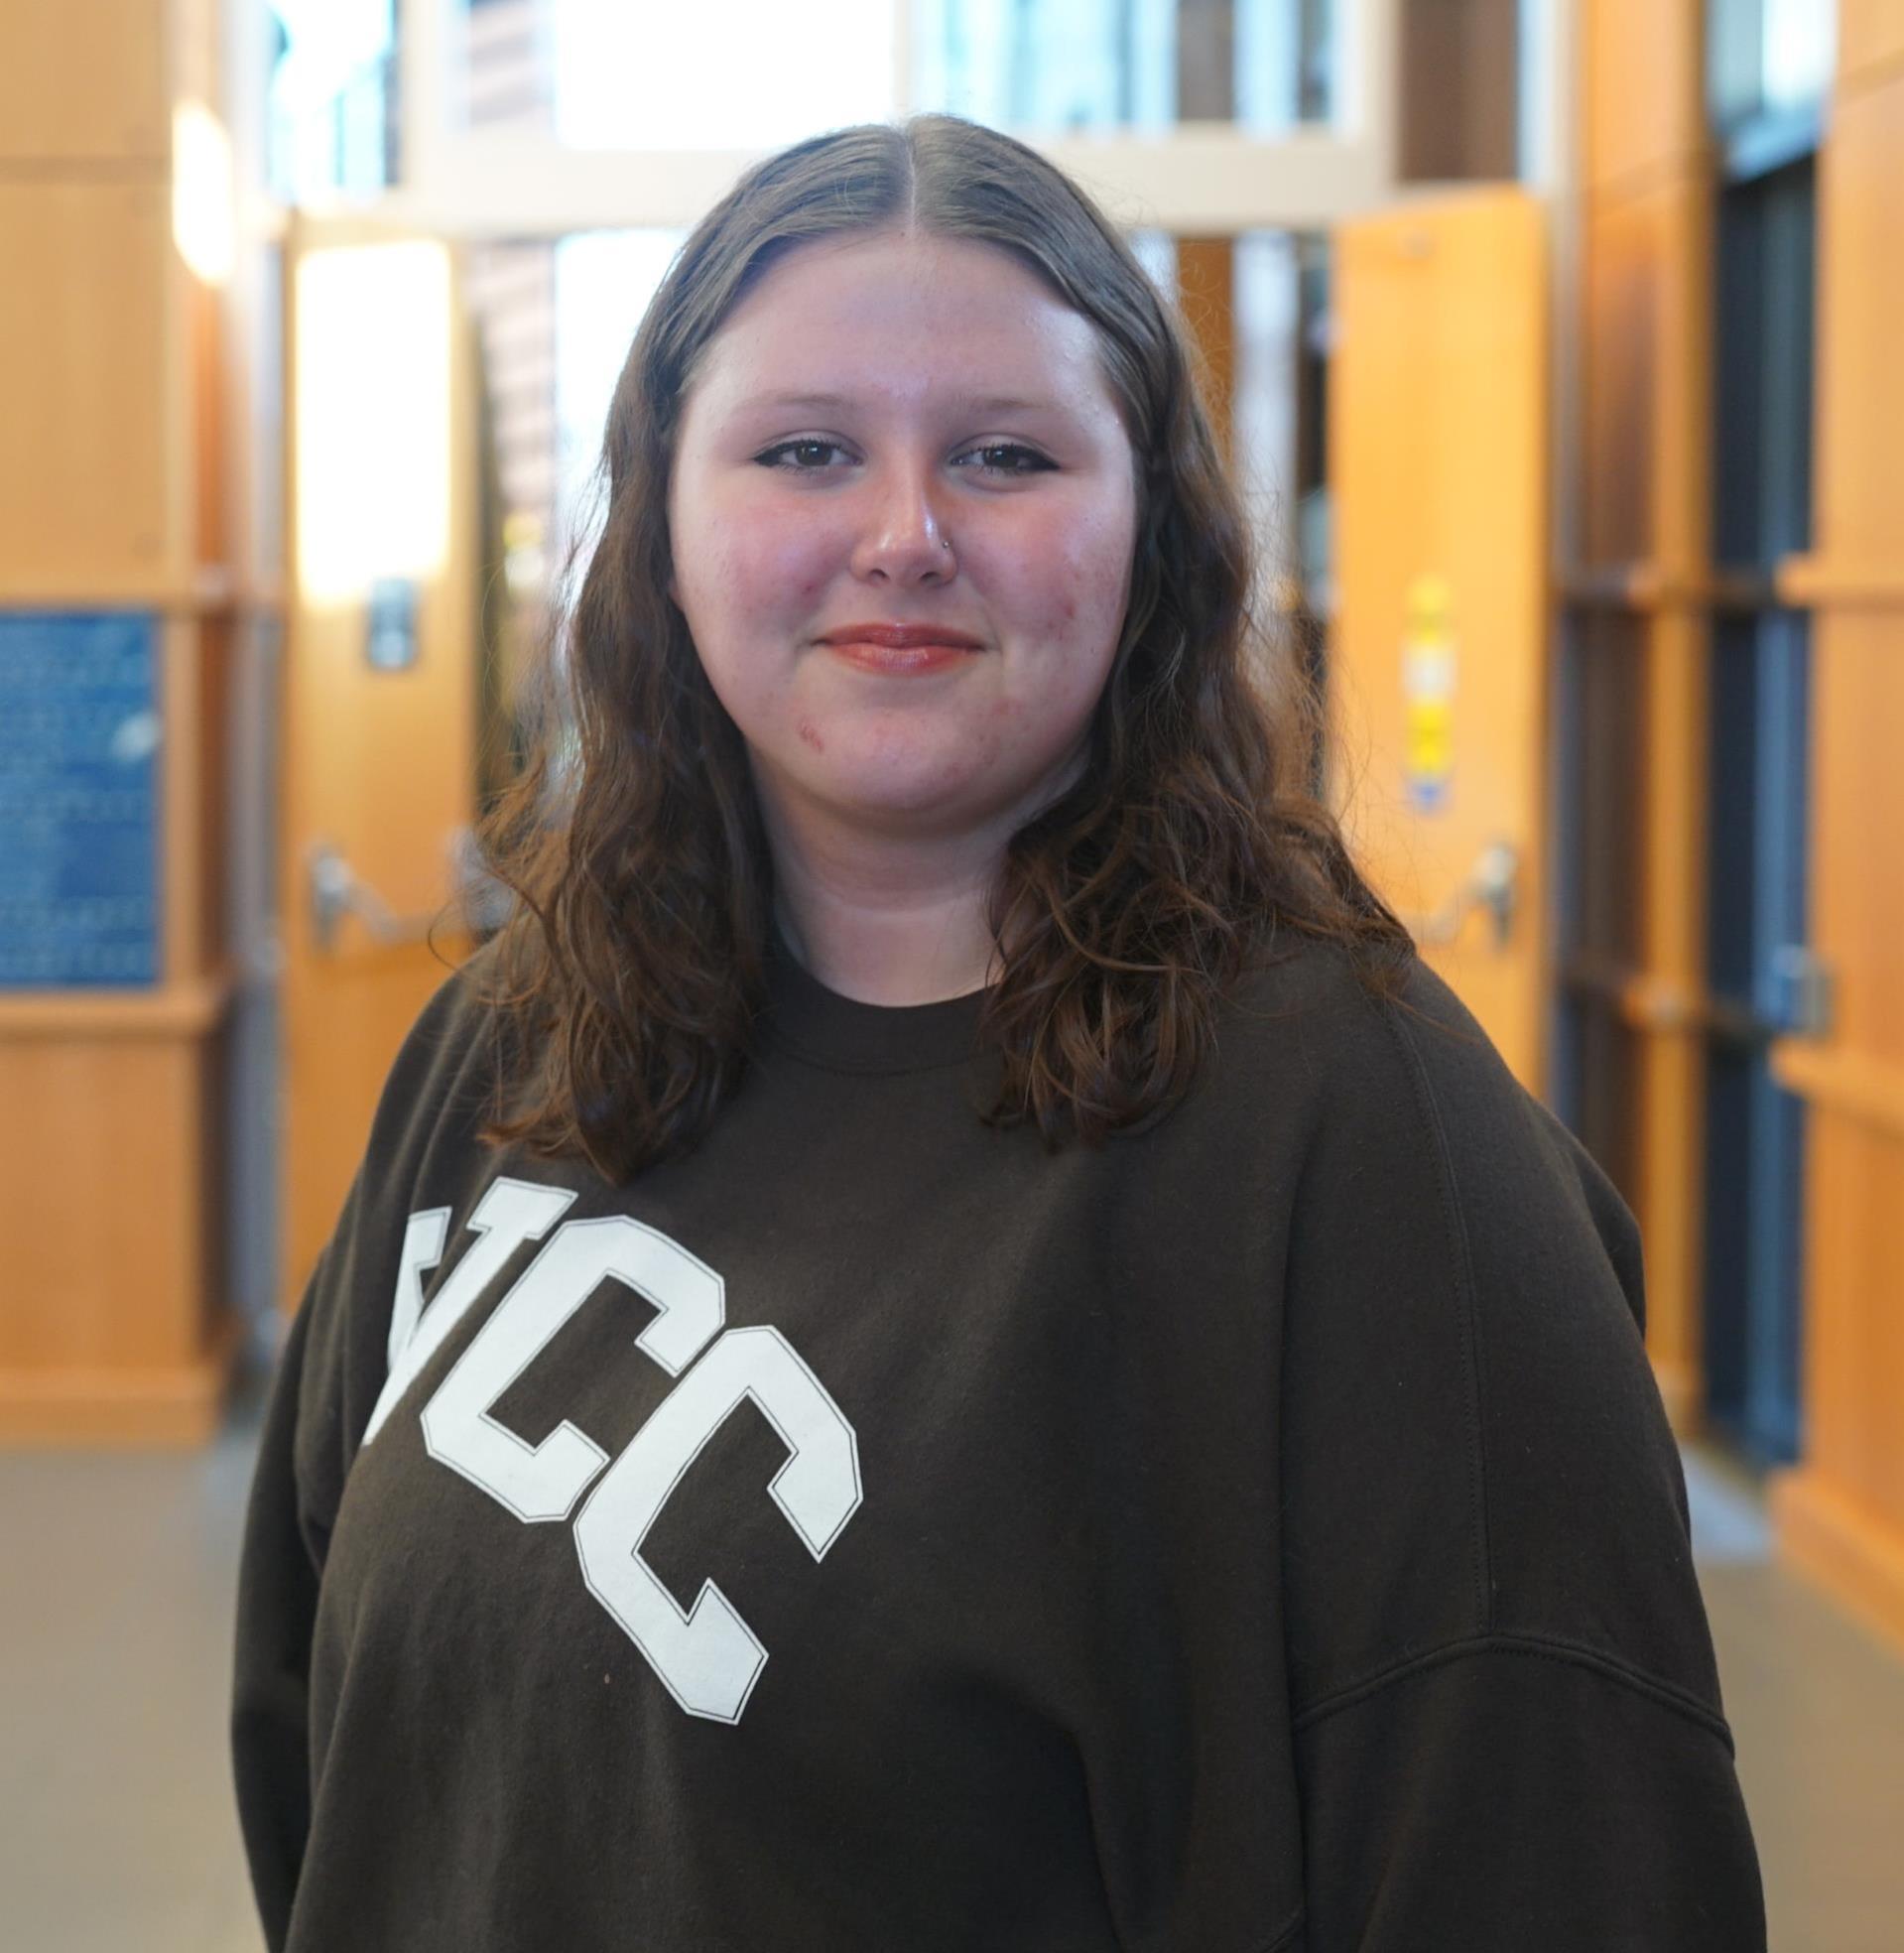 headshot of Kristina standing in front of open doors wearing a brown WCC sweatshirt. She is smiling and has brown hair and brown eyes